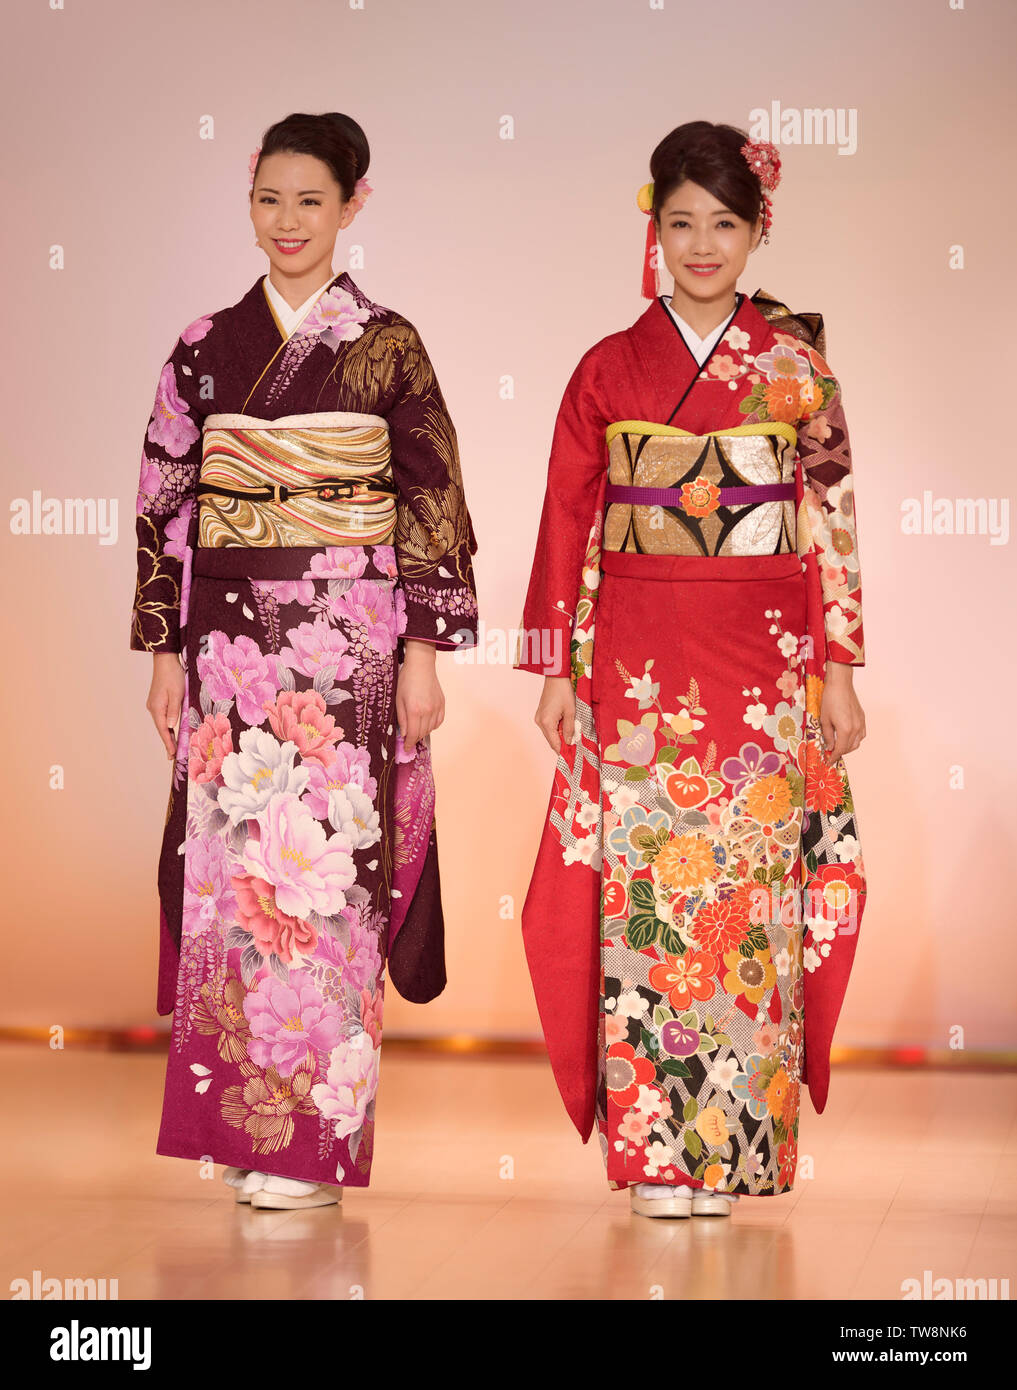 License available at MaximImages.com - Japanese ladies in a beautiful colorful red and purple kimono with floral design at a fashion show in Kyoto Stock Photo